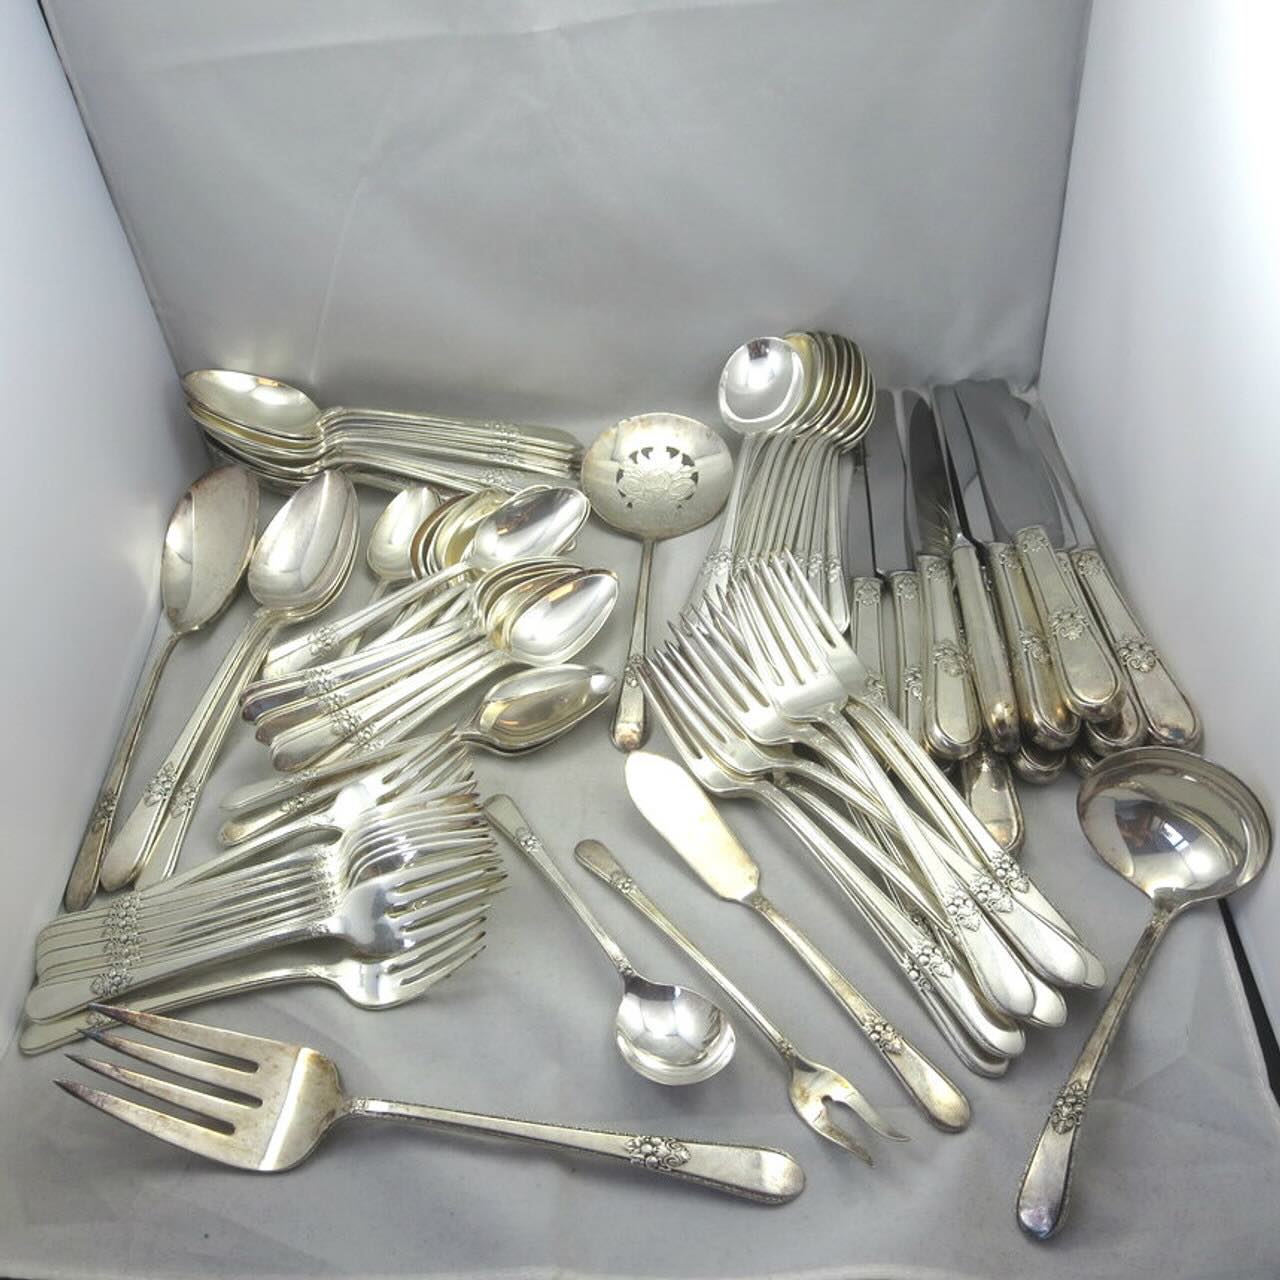 How To Determine If Rogers Silverware Is Authentic